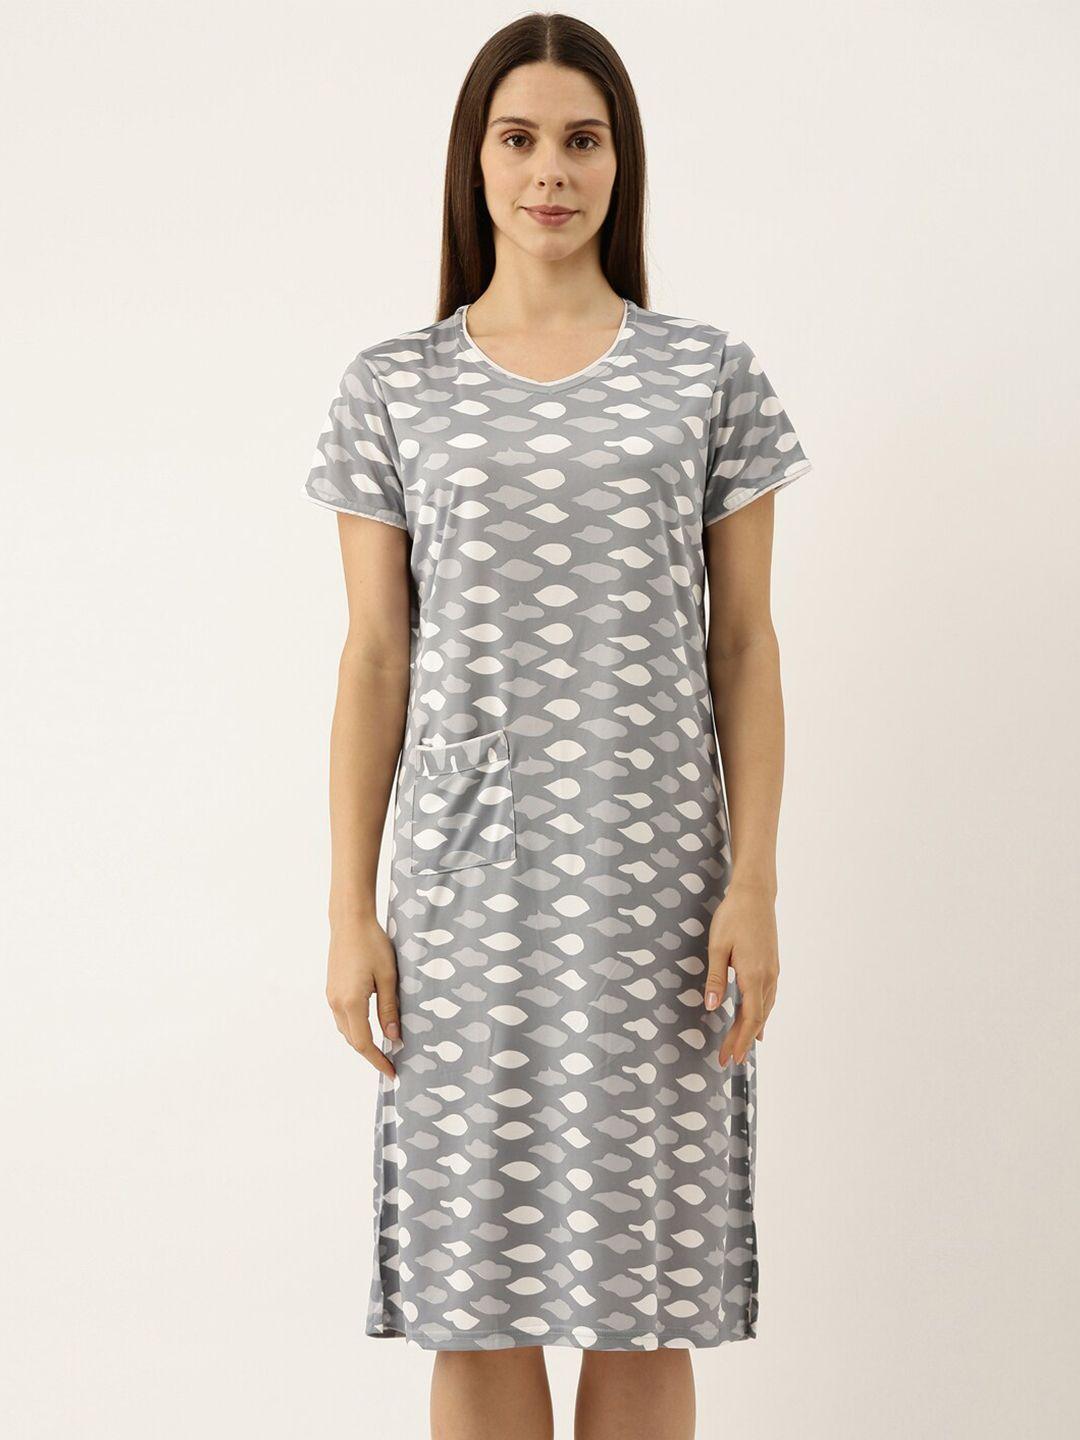 bannos swagger grey & white printed pure cotton nightdress